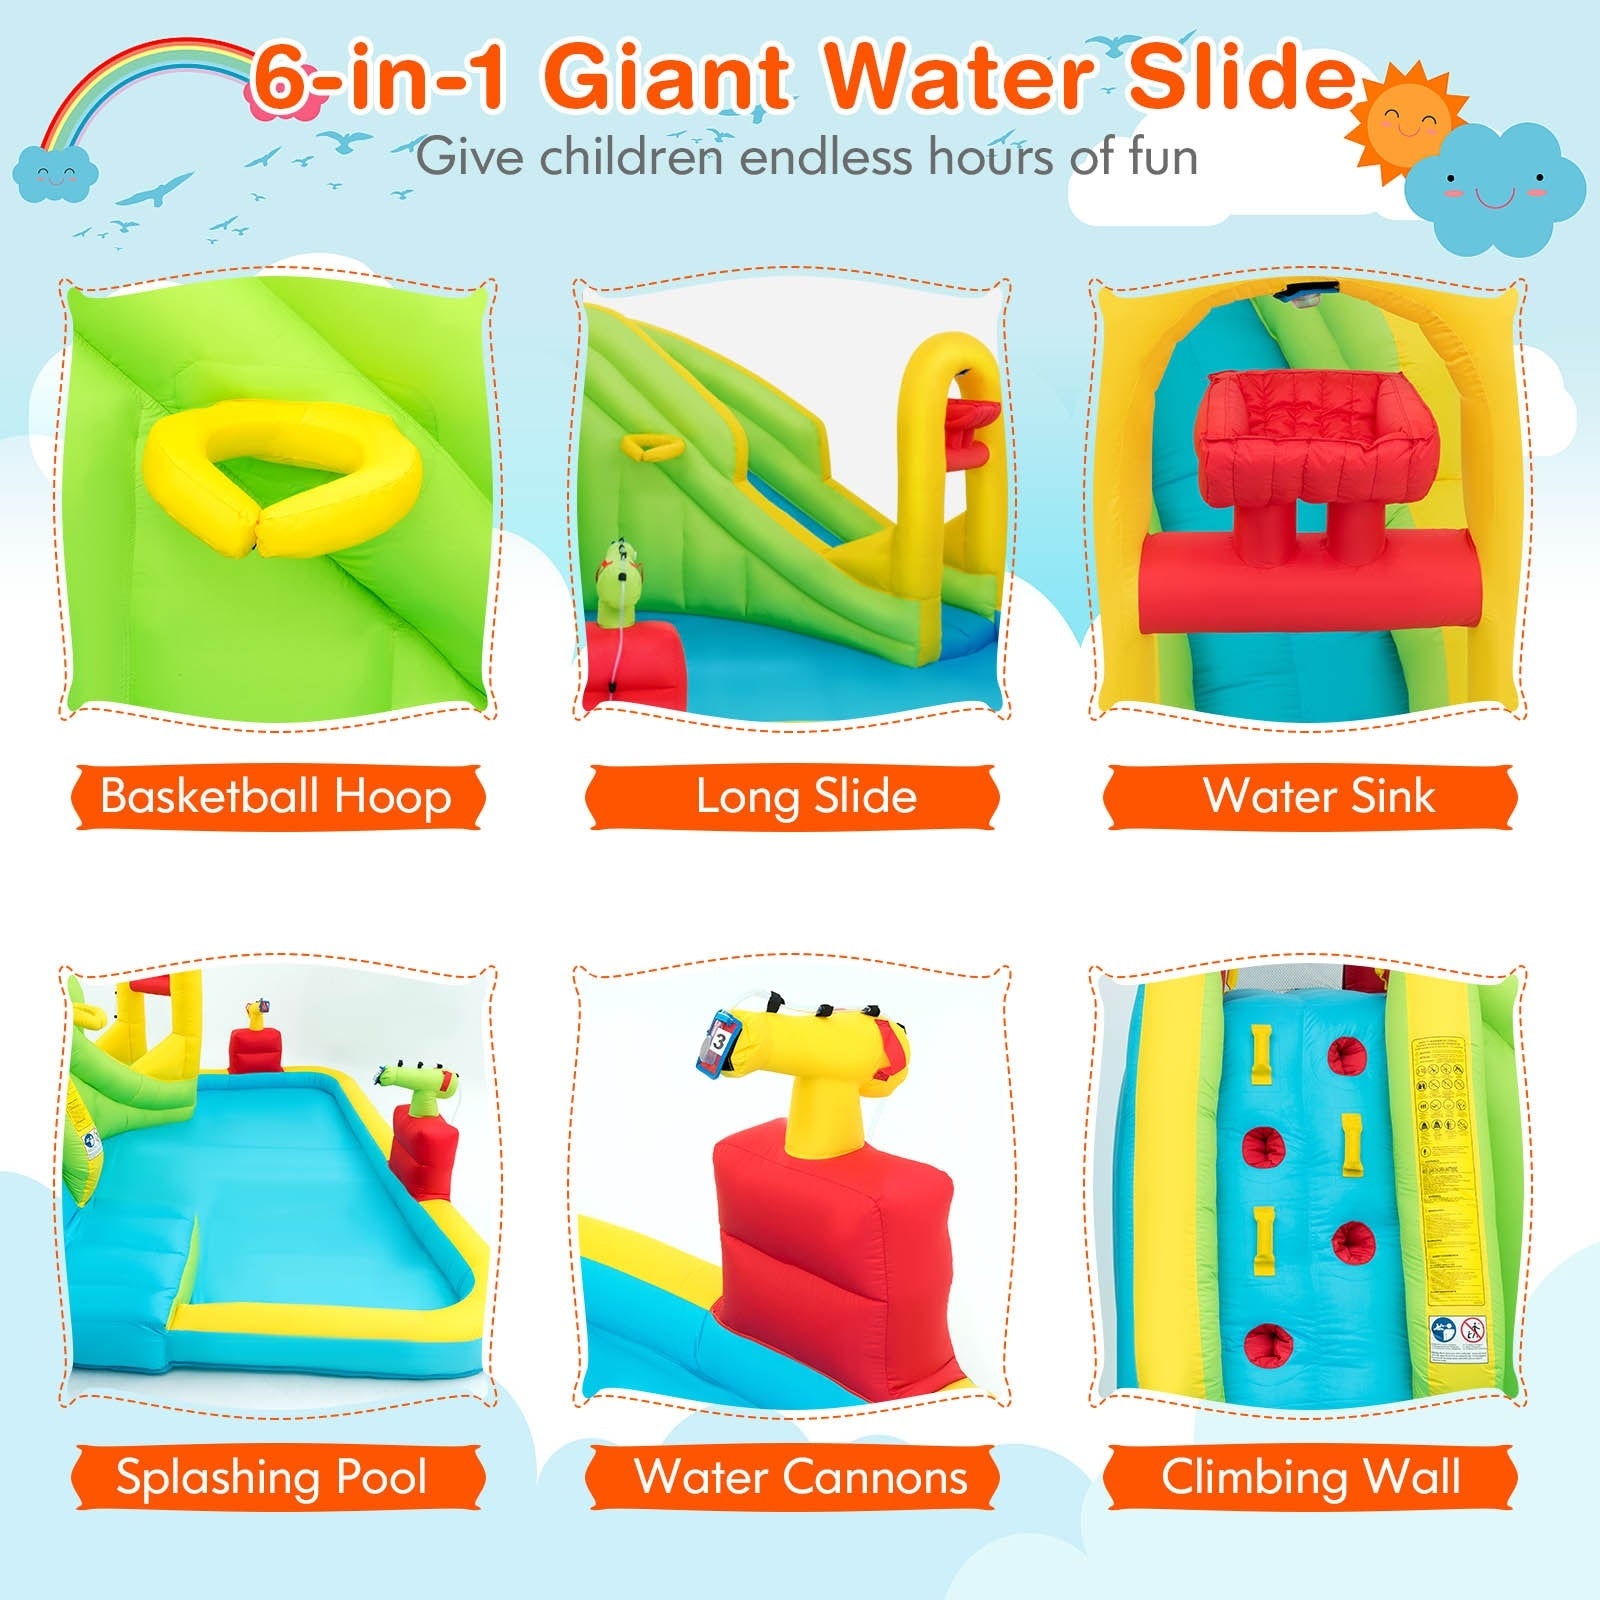 Endless Fun for Kids: This inflatable bounce house offers a world of entertainment with its versatile design. Featuring a long slide, climbing wall, splash pool, and basketball hoop, children can revel in a multitude of exciting activities simultaneously, ensuring a joyful and unforgettable childhood experience.